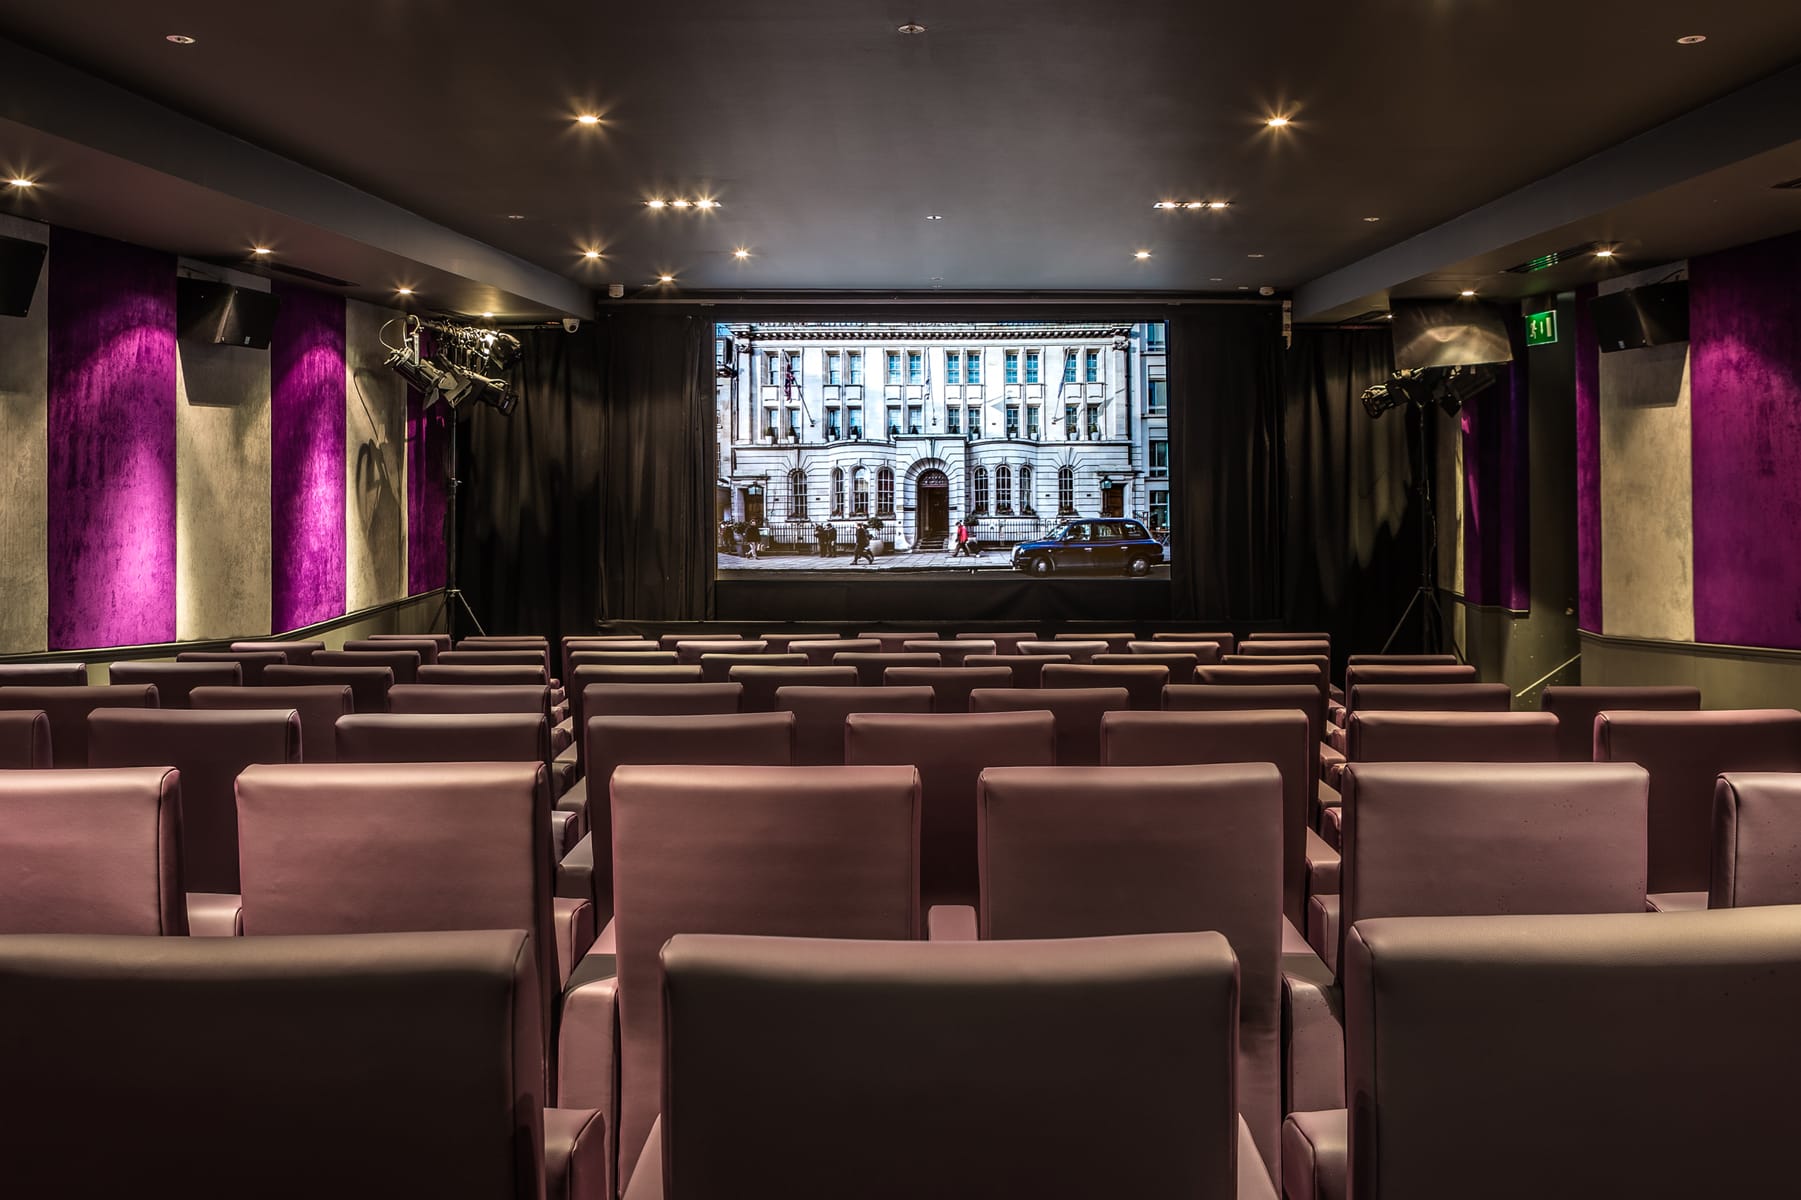 Cinema Room showing the large screen and rows of purple chairs.